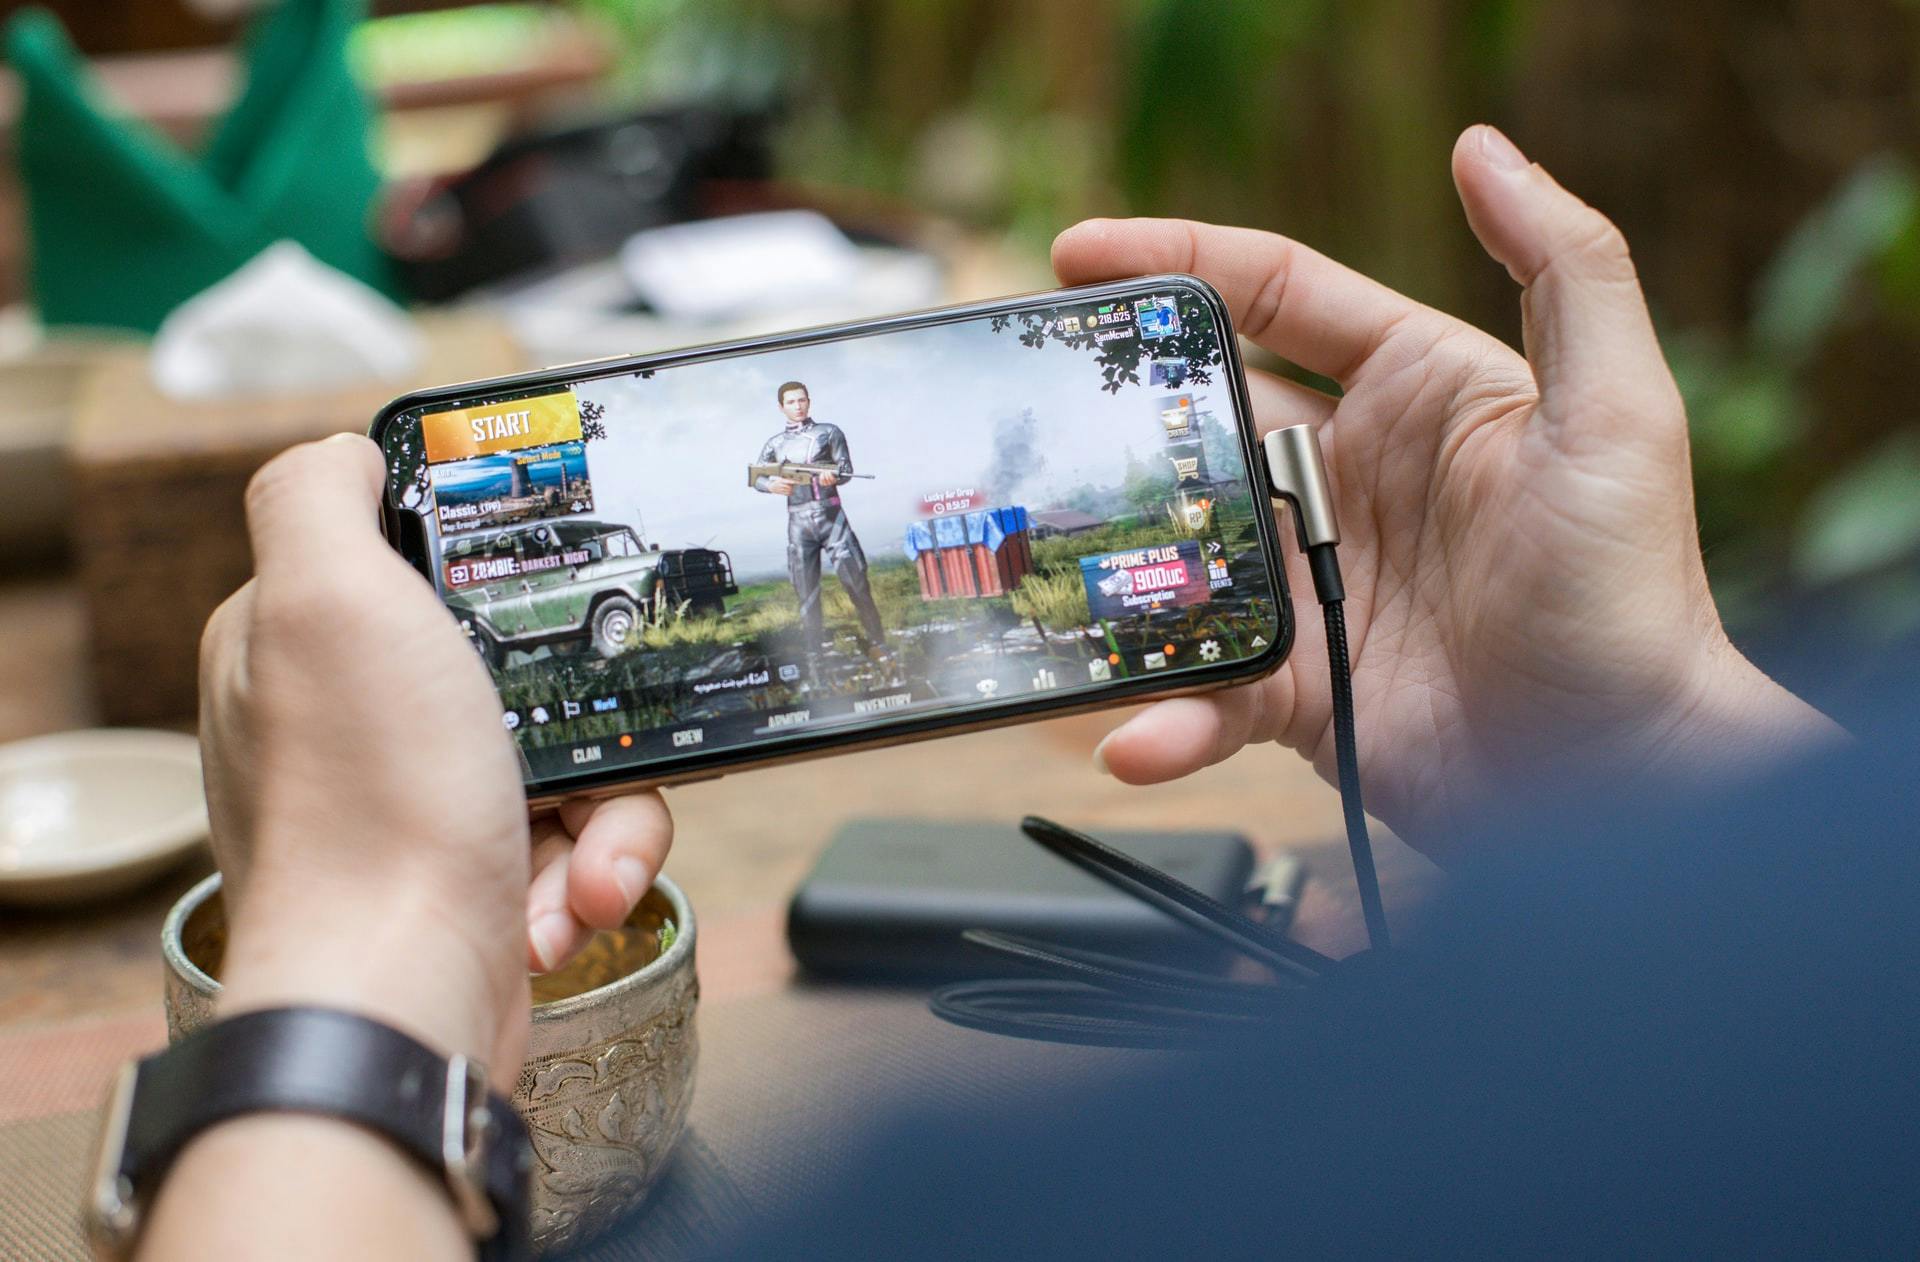 Mobile users spend over $350 million daily on games and apps in 2021